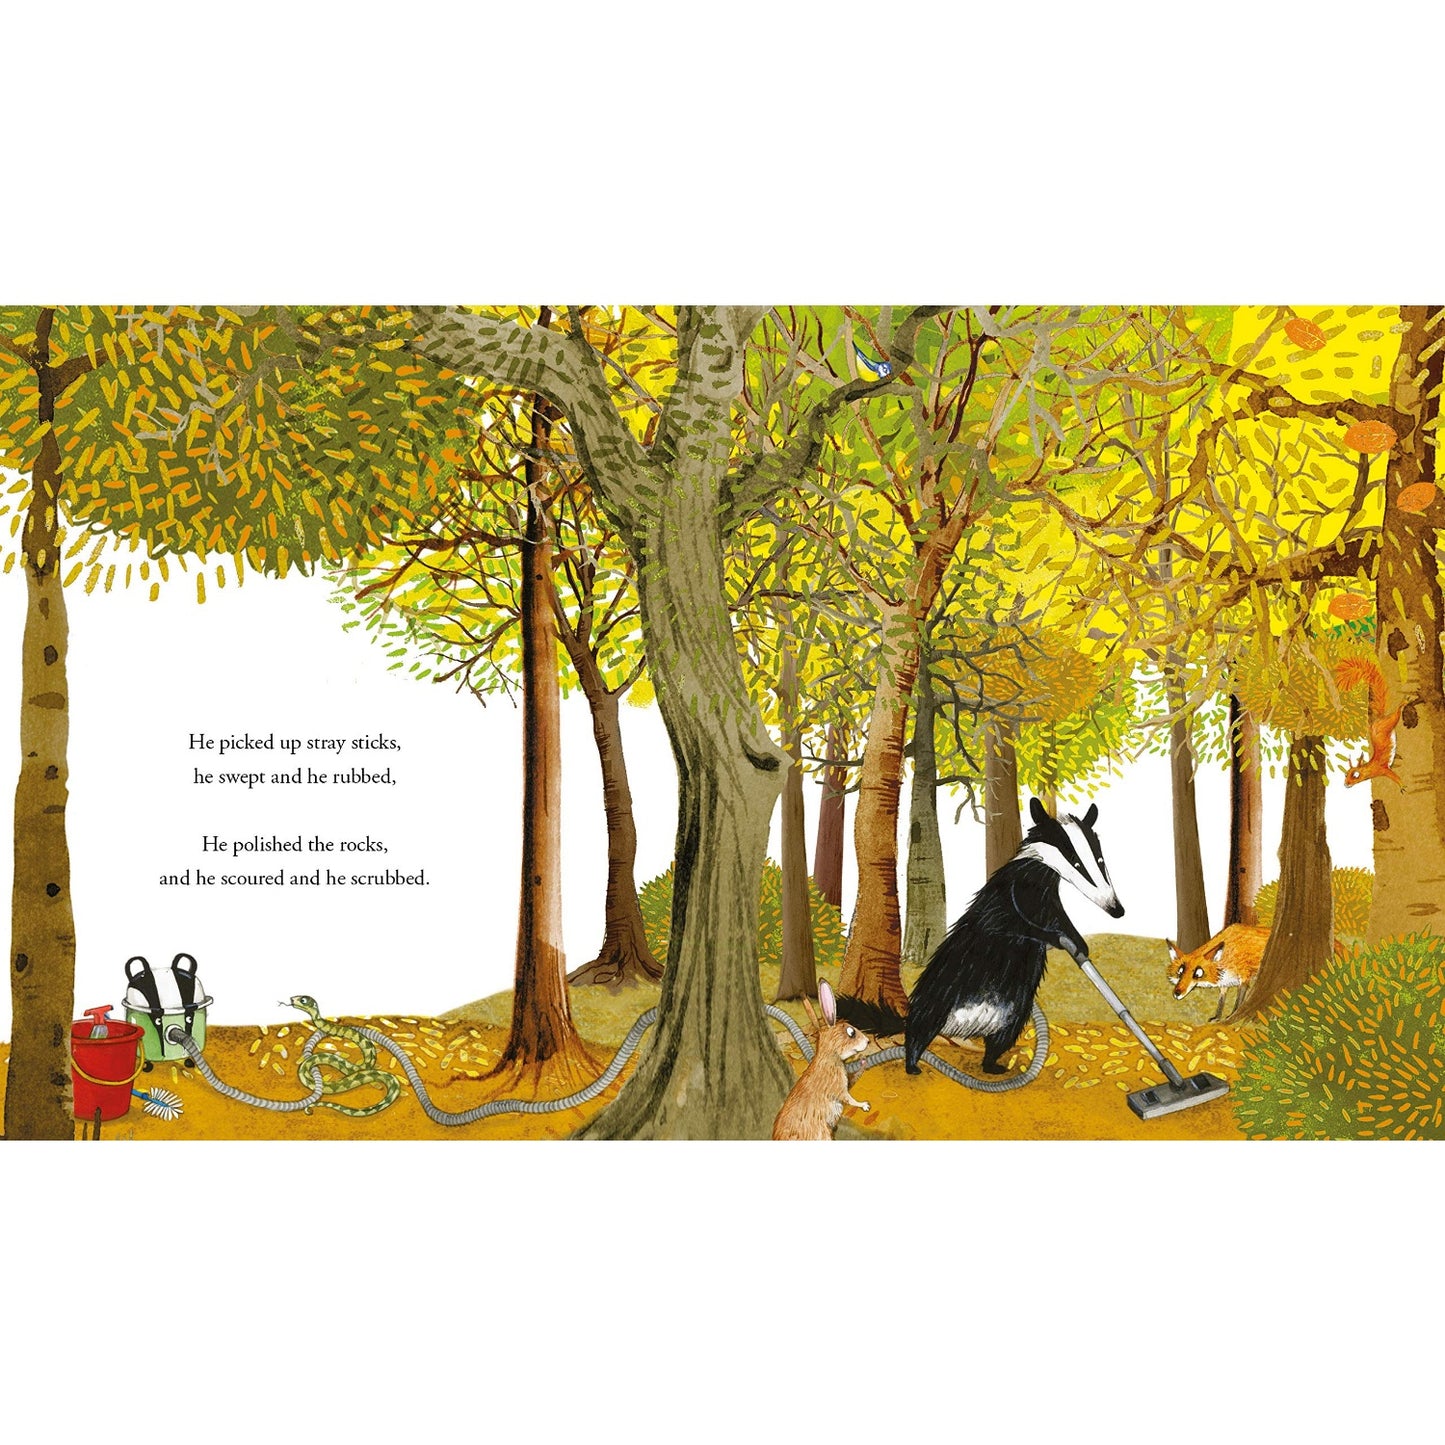 Tidy | Children's Picture Book on Protecting the Environment